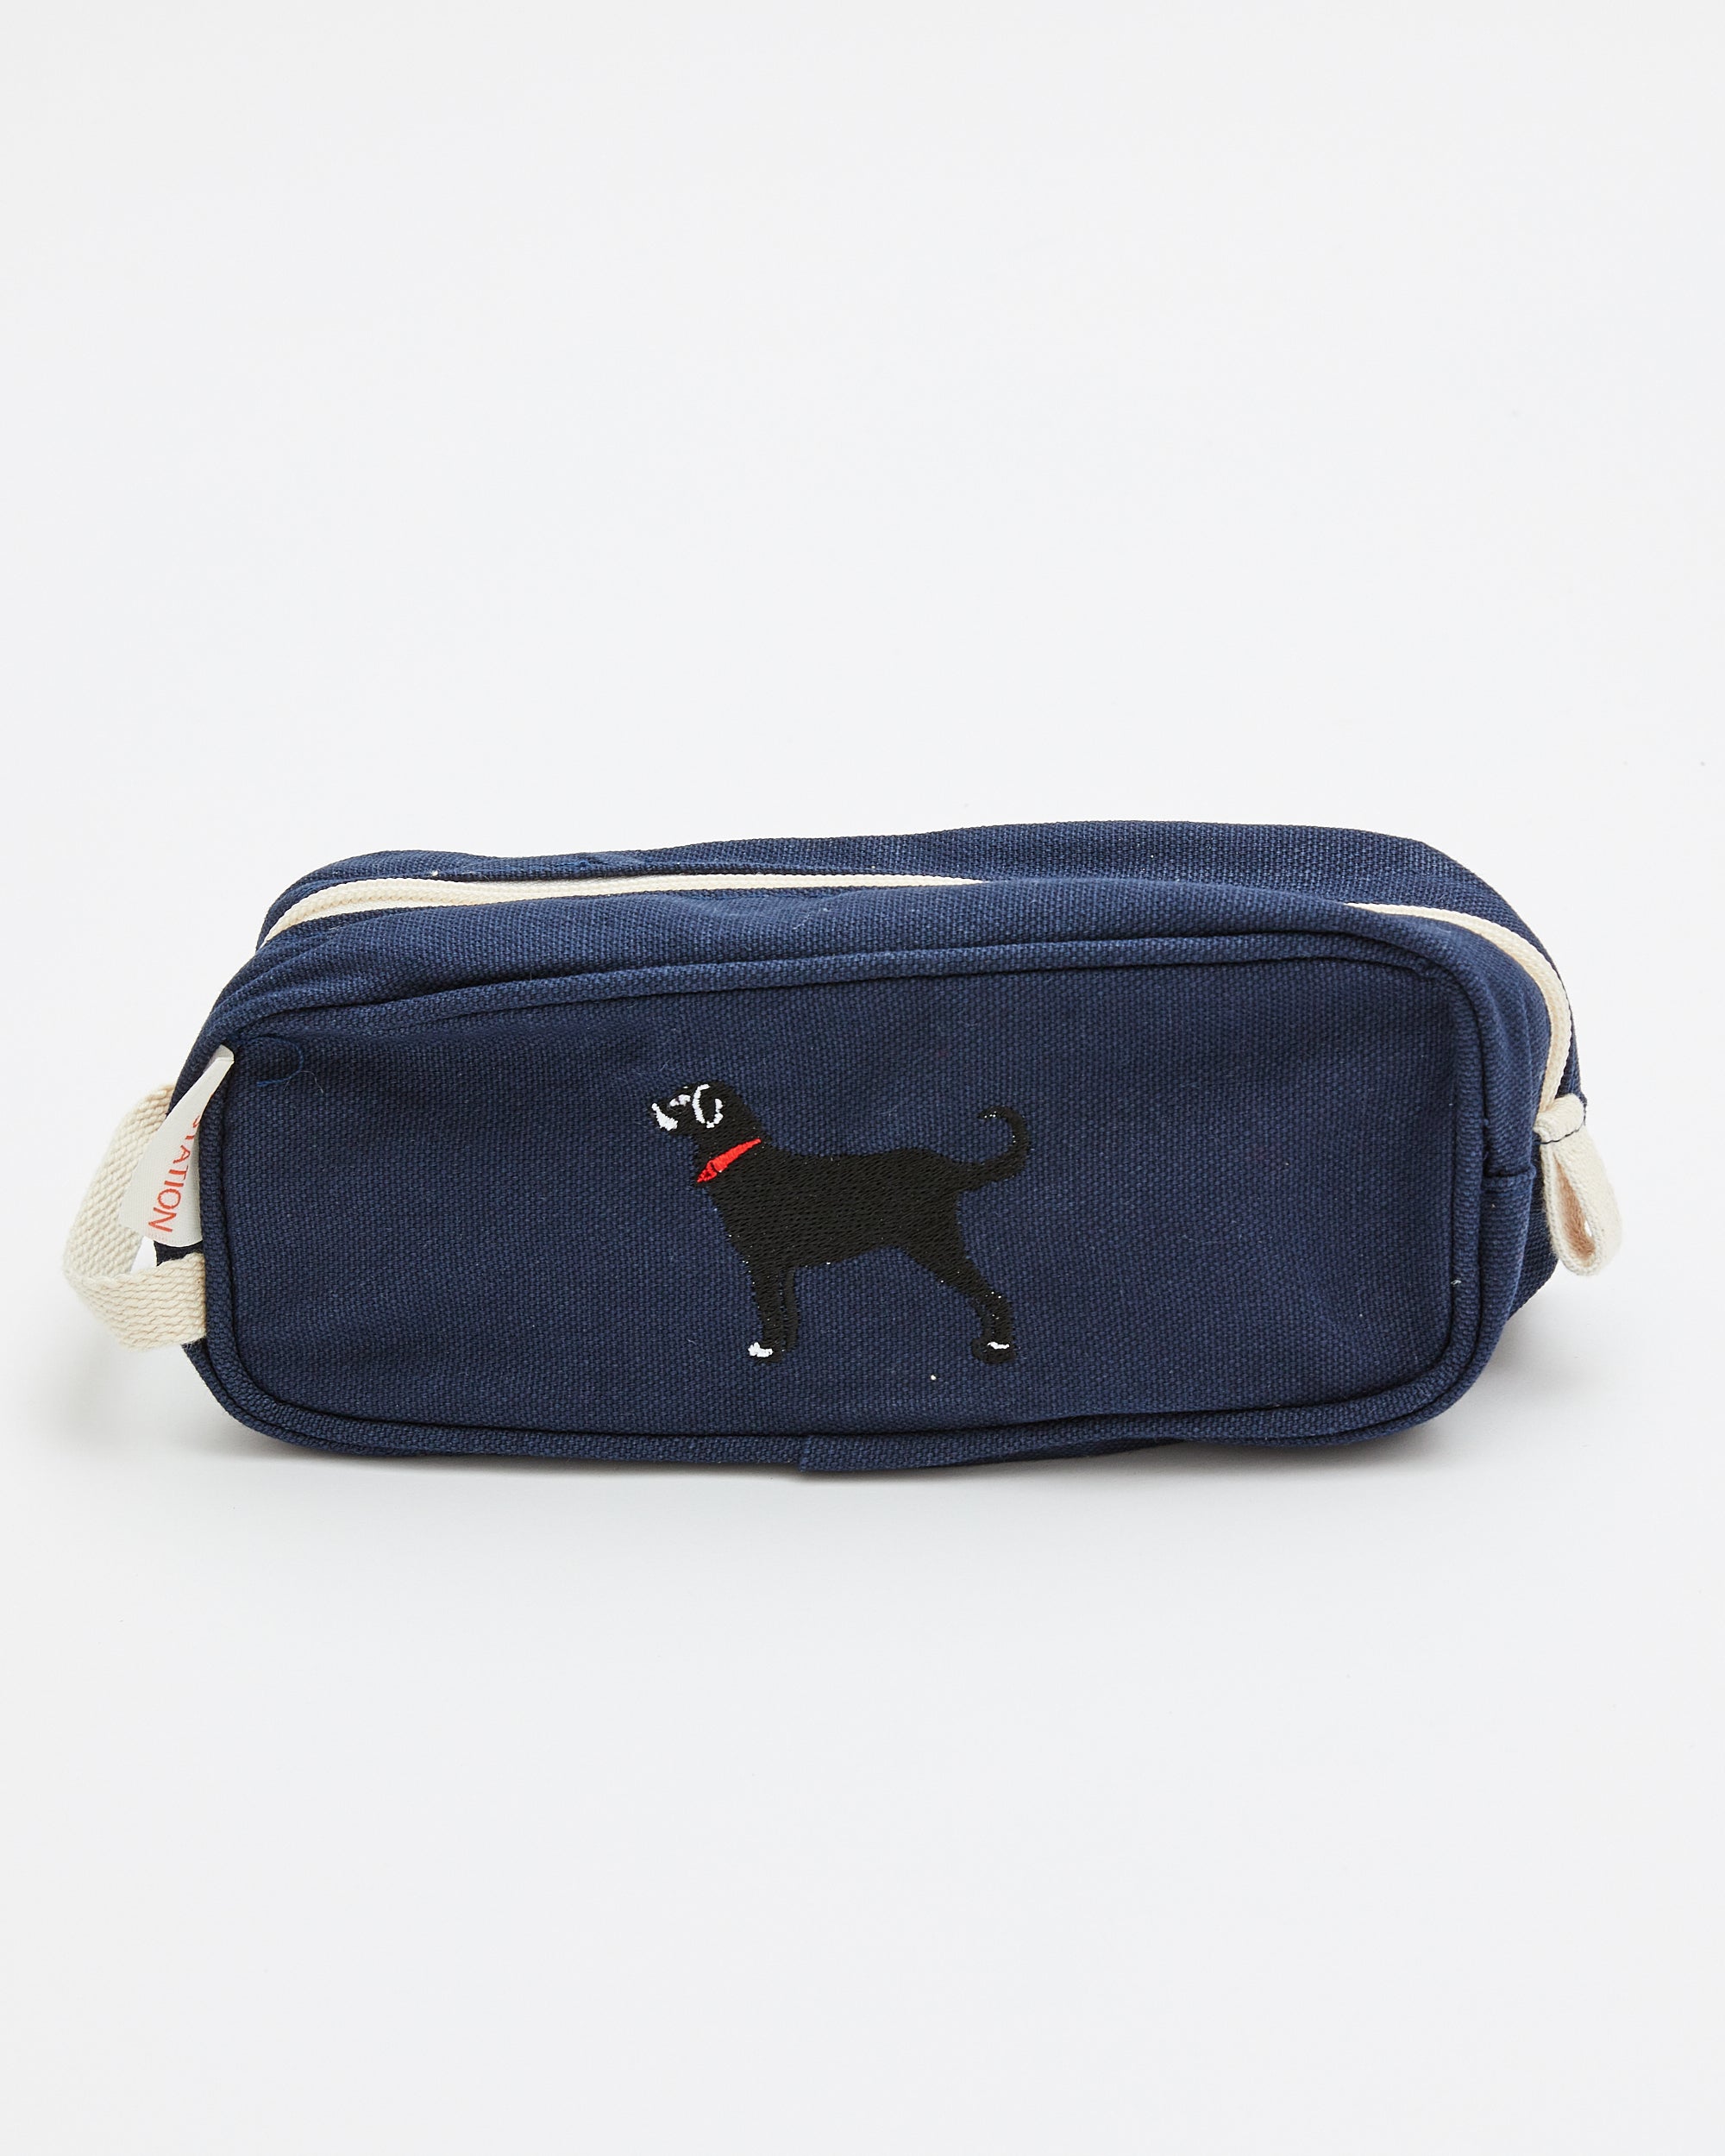 Black Scottie Dog on Blue Background Tote Bag by paper moon projects |  Society6